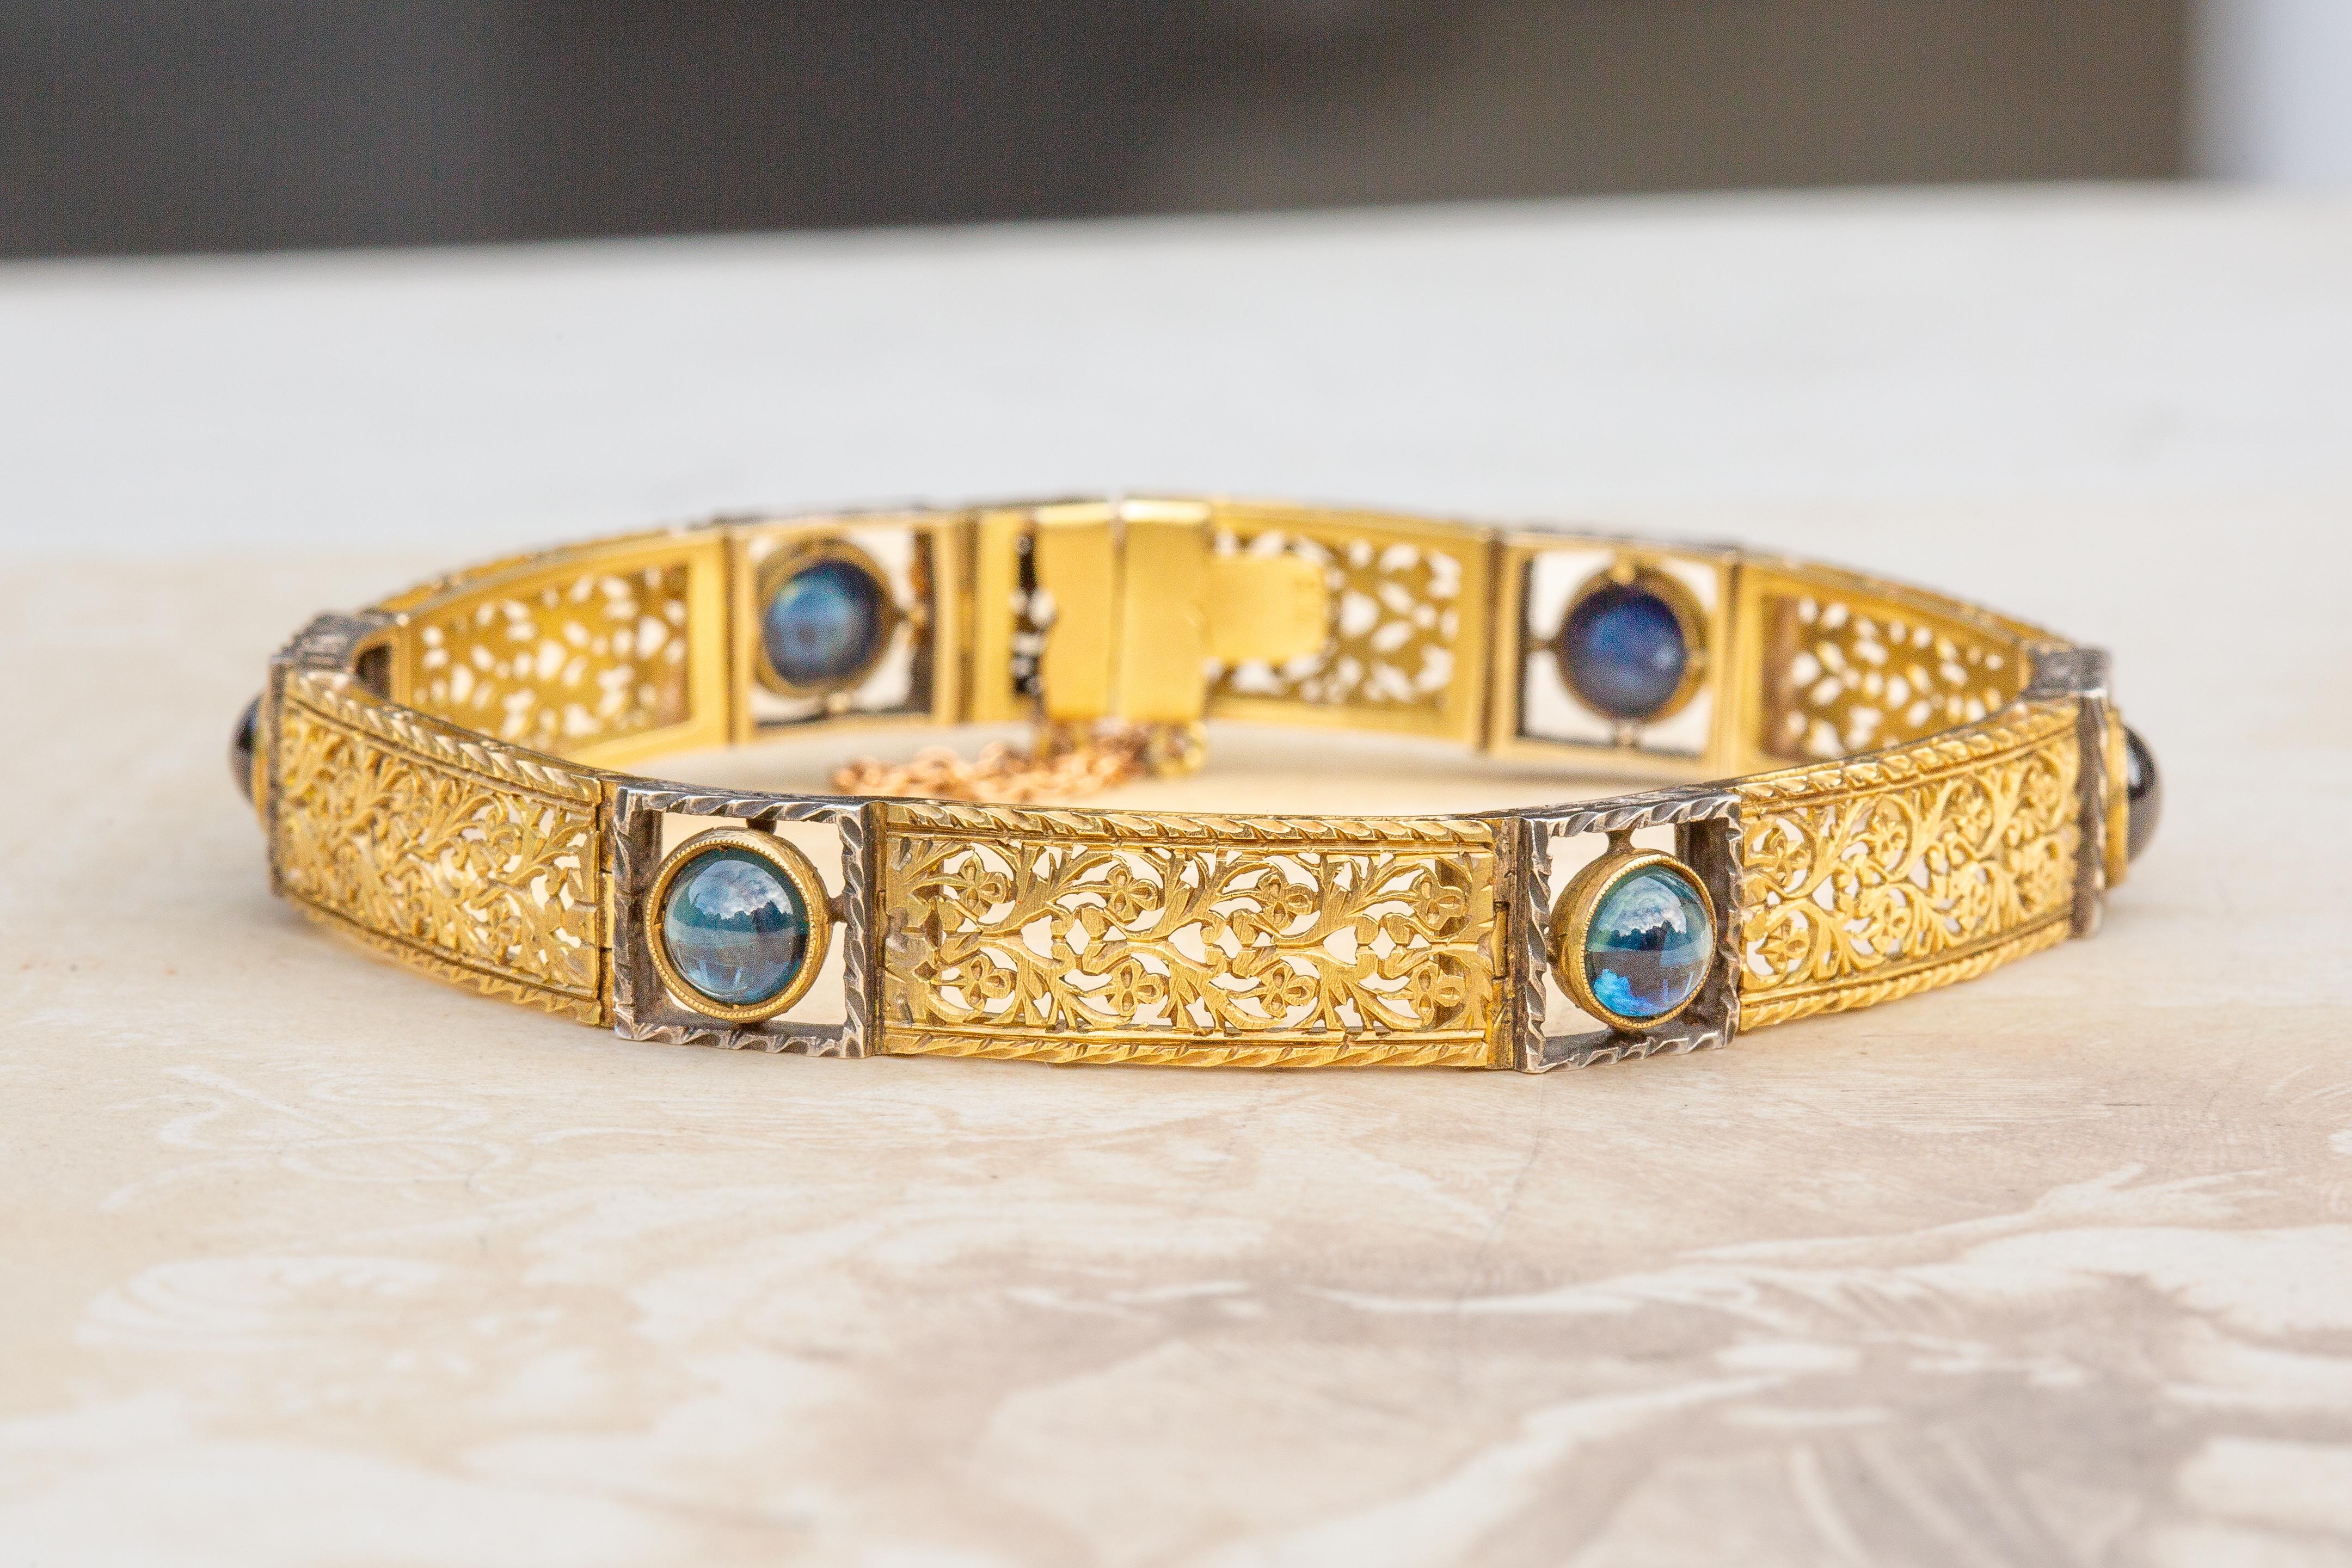 An unusual antique Art Nouveau sapphire openwork bracelet crafted in solid 18K gold, circa 1900. 

The articulated bracelet is designed with alternating panels of gold and silver. The gold openwork panels are intricately chased with naturalistic